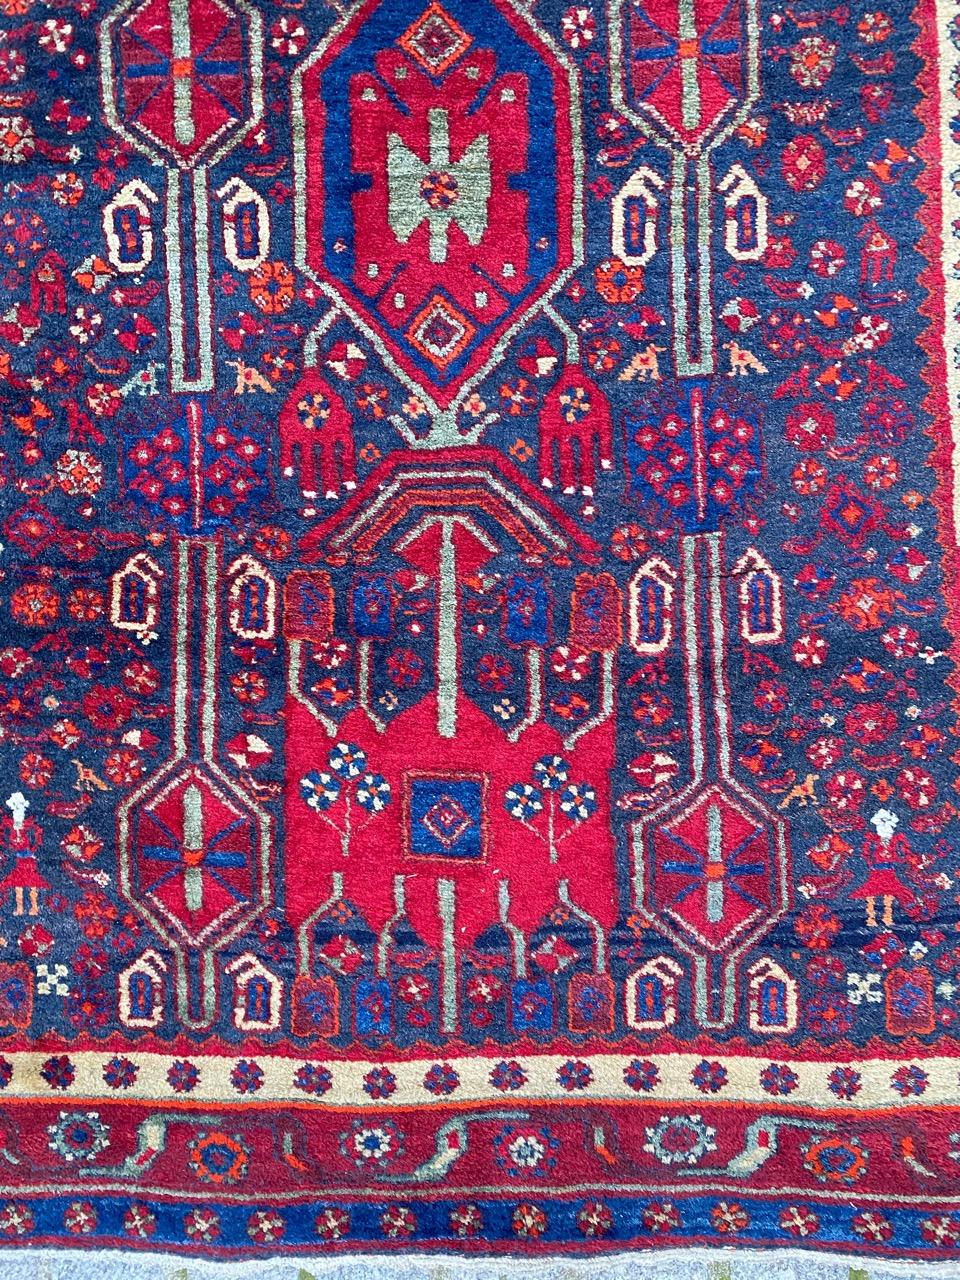 Nice long rug with beautiful tribal design and nice colors, entirely hand knotted with wool velvet on cotton foundation.

✨✨✨
